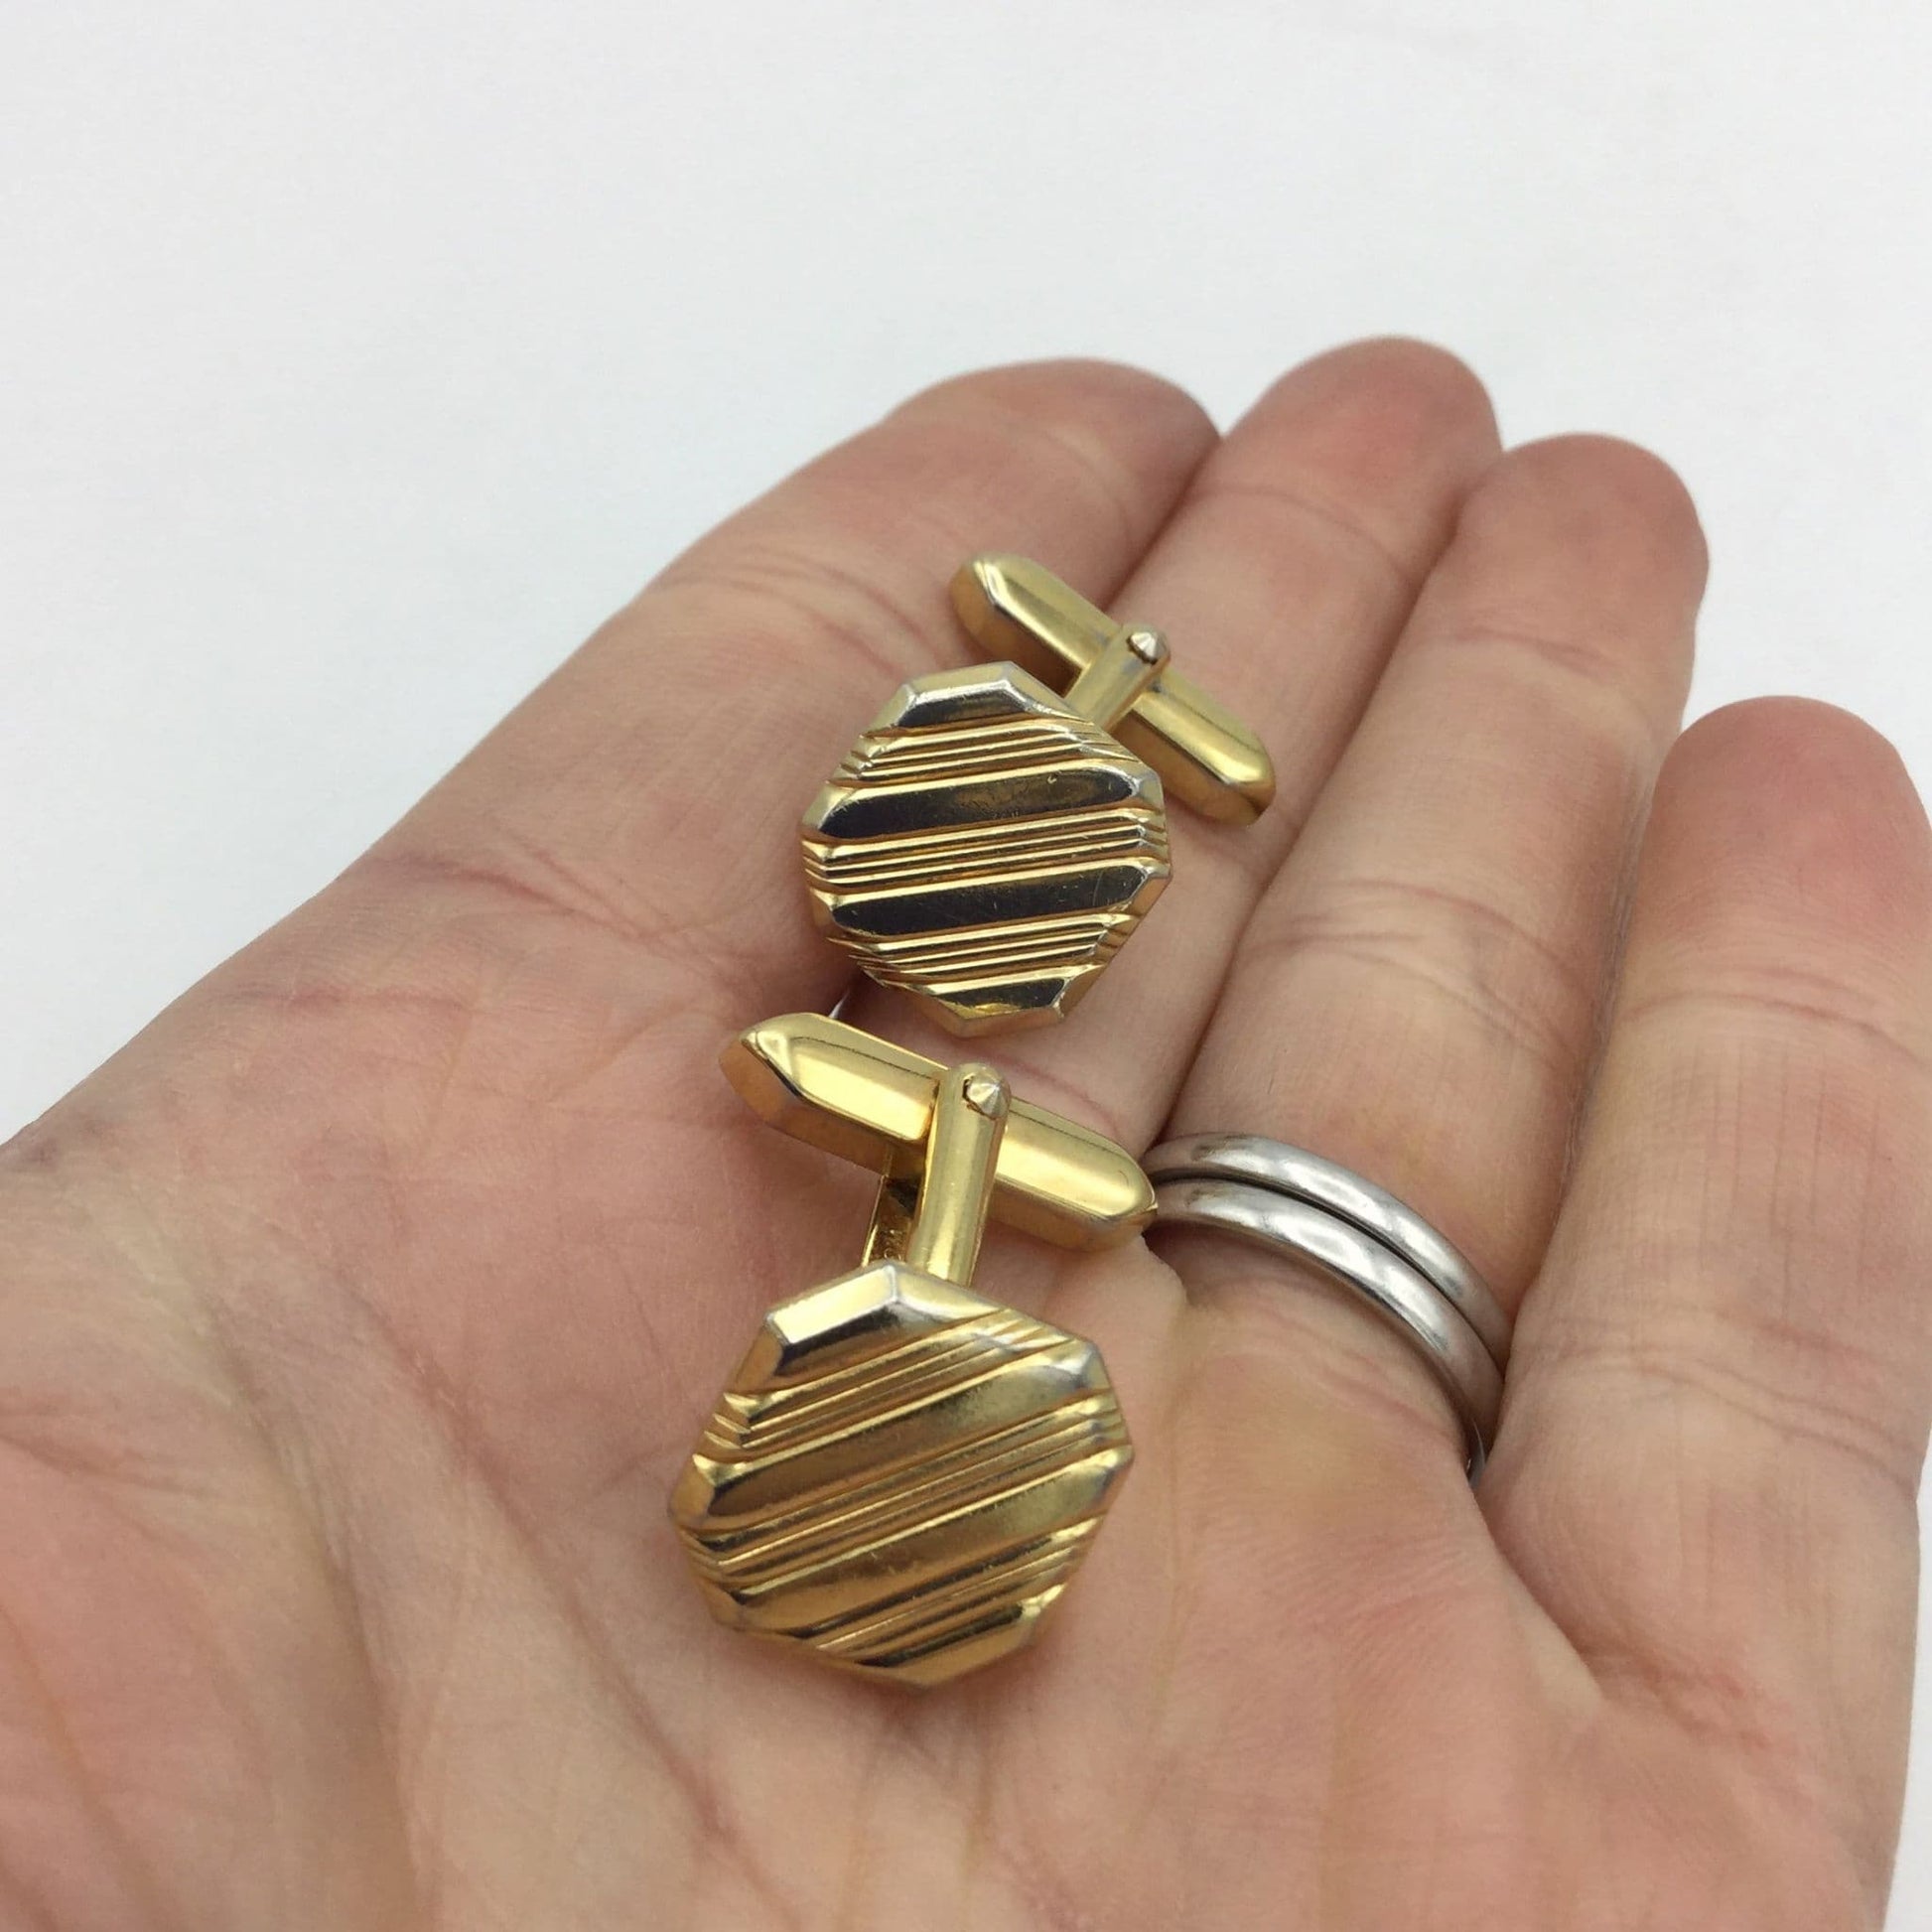 Gilded square cufflinks with a striped pattern held in a hand